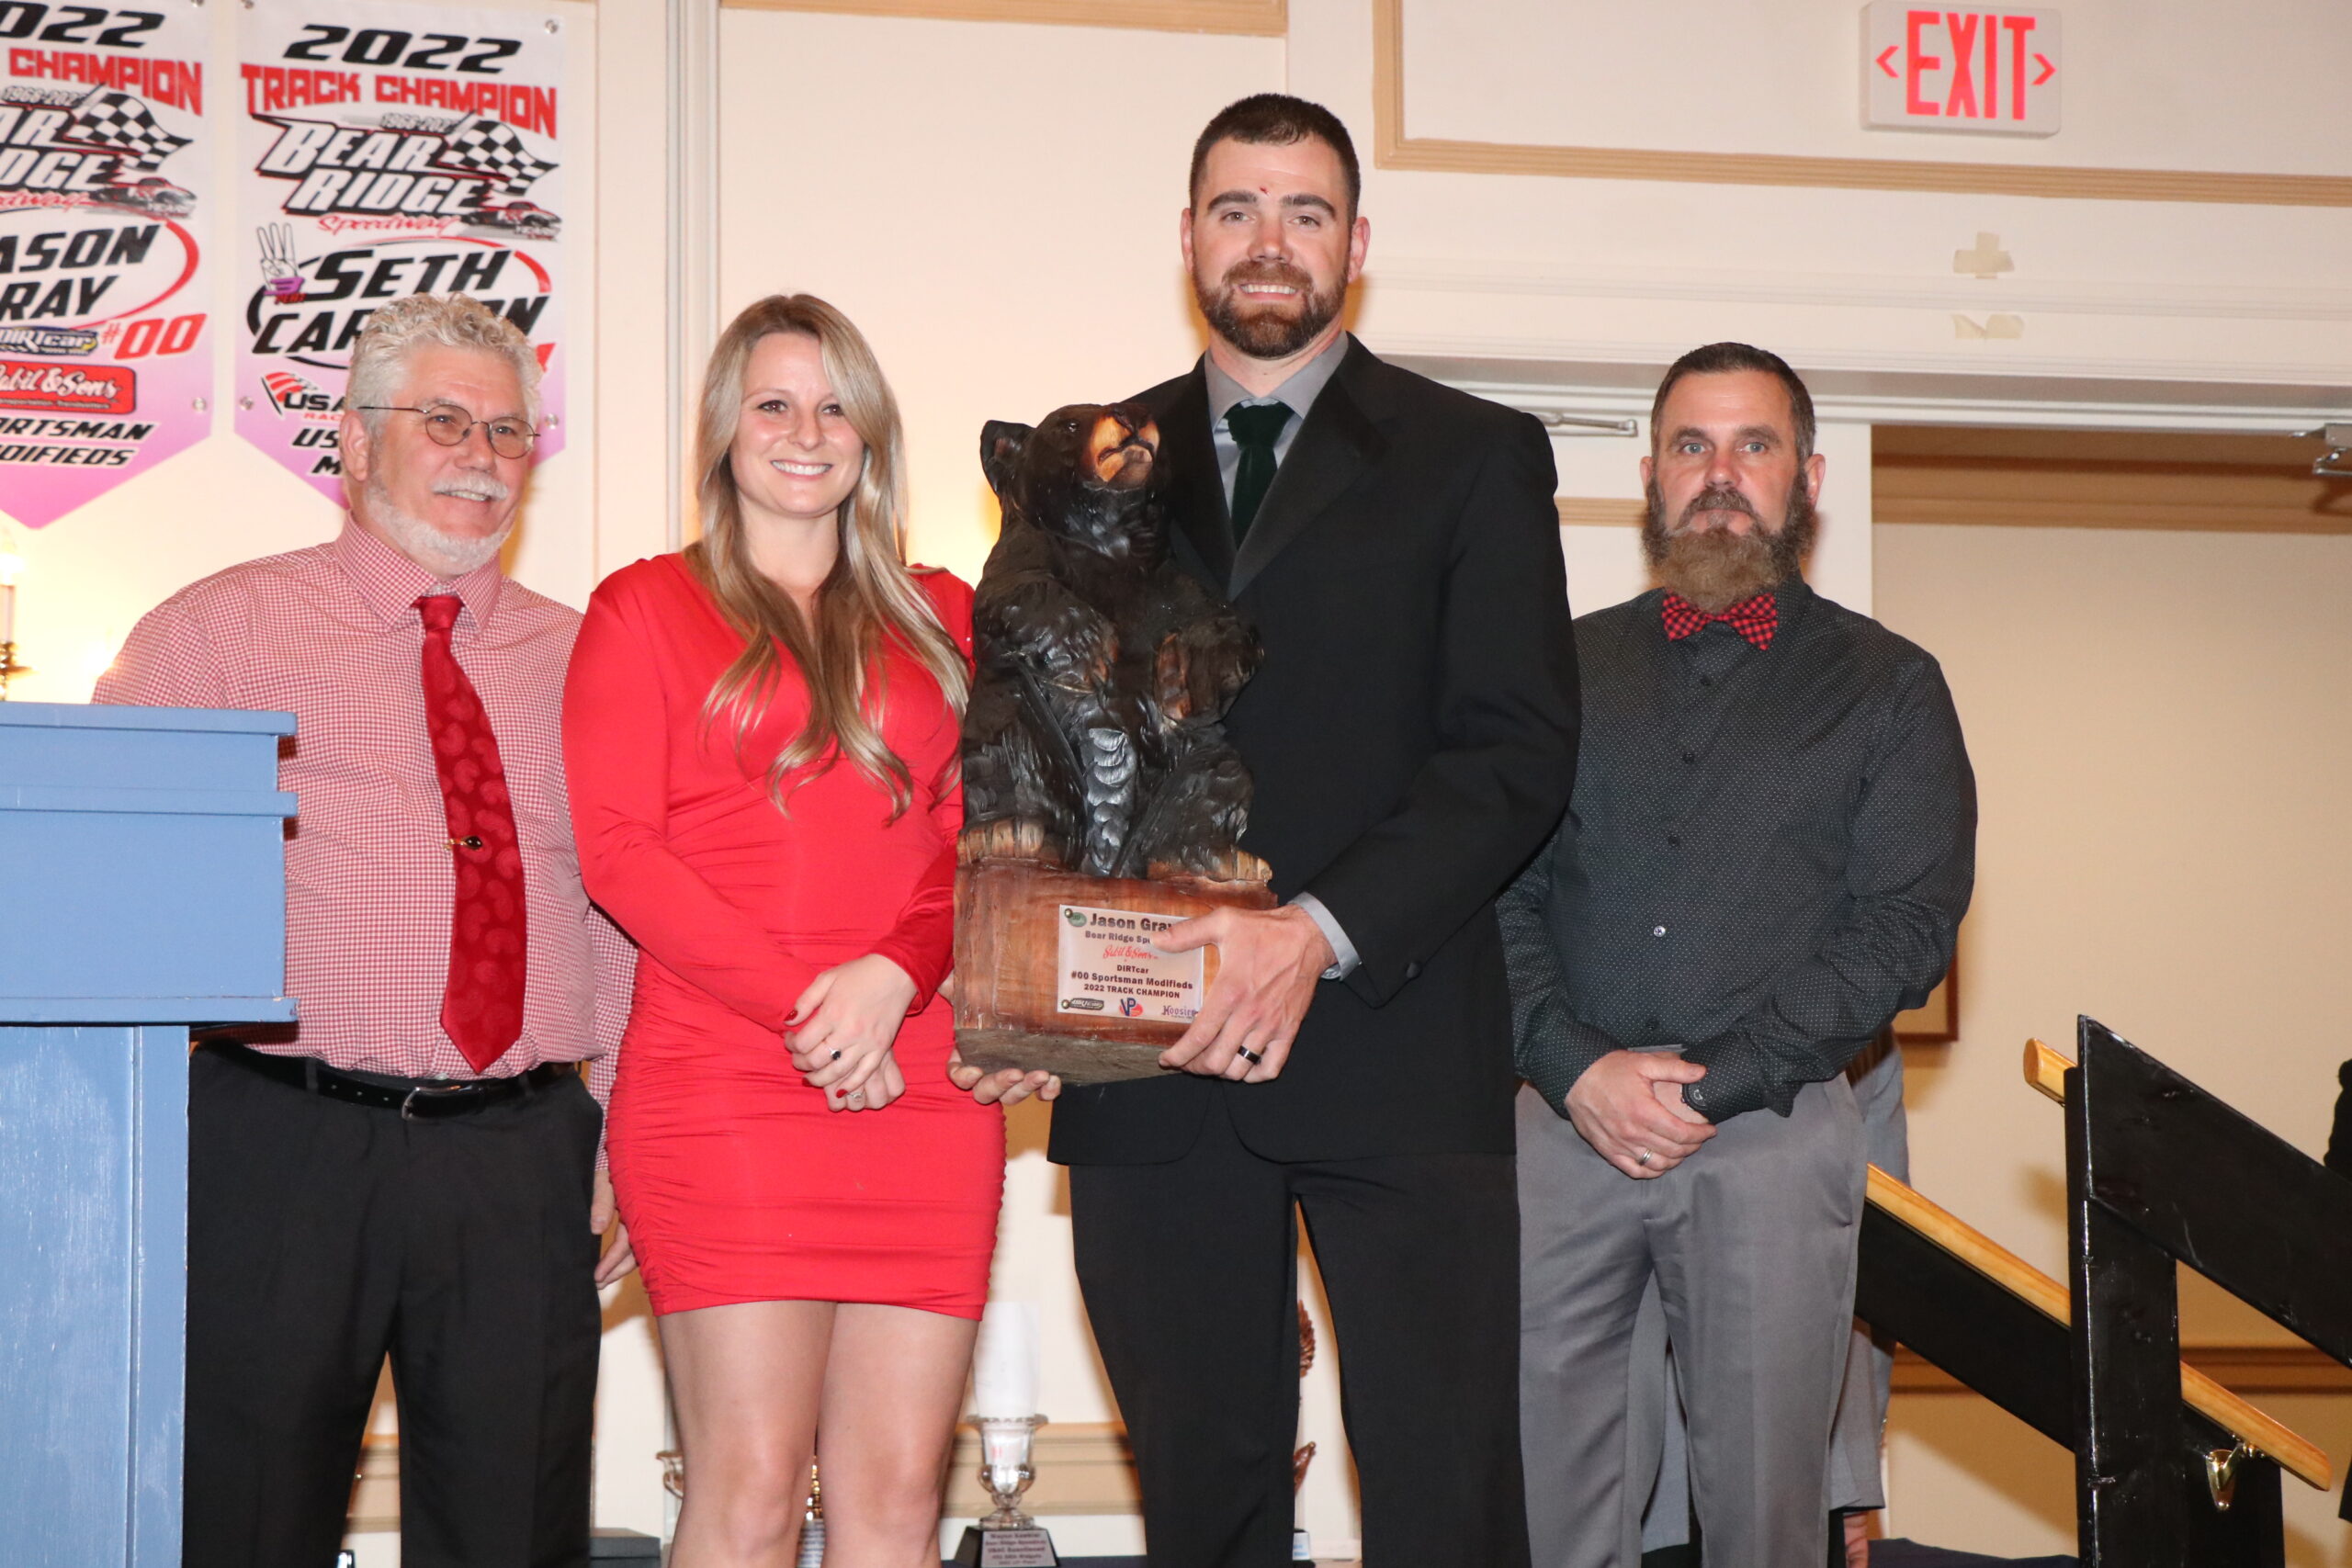 2023 Annual Awards Banquet(s) Saturday Nov 11th Mods/Coupes/Midgets/360 Sprint cars